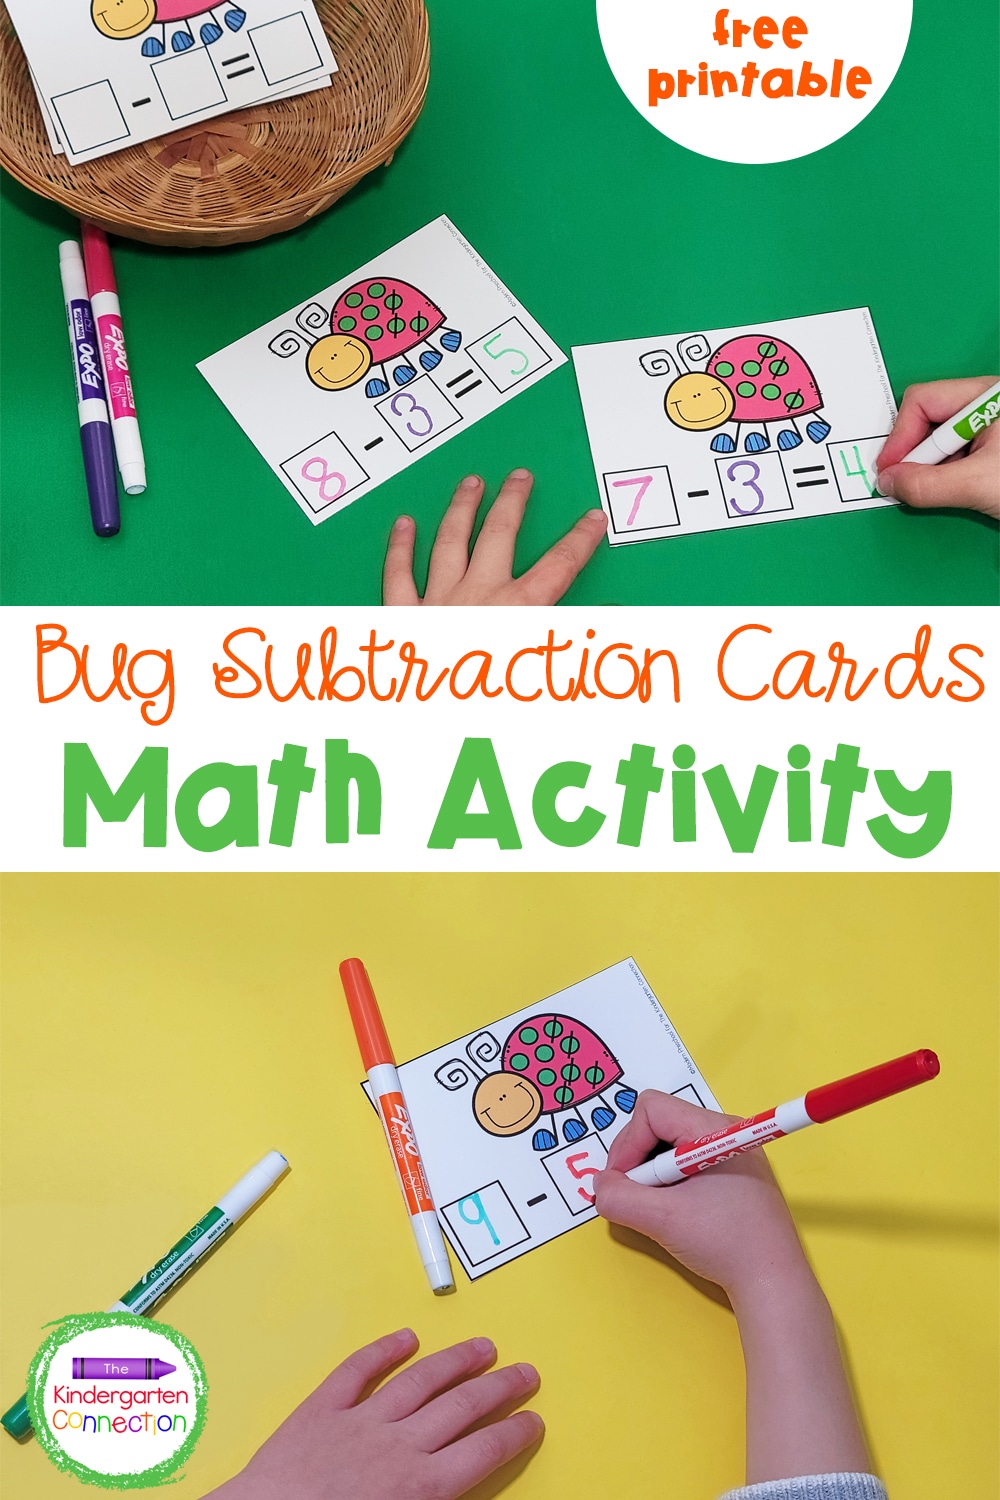 Grab these free Bug Subtraction Cards and add some hands-on, insect-themed fun to your Kindergarten math centers and small groups!